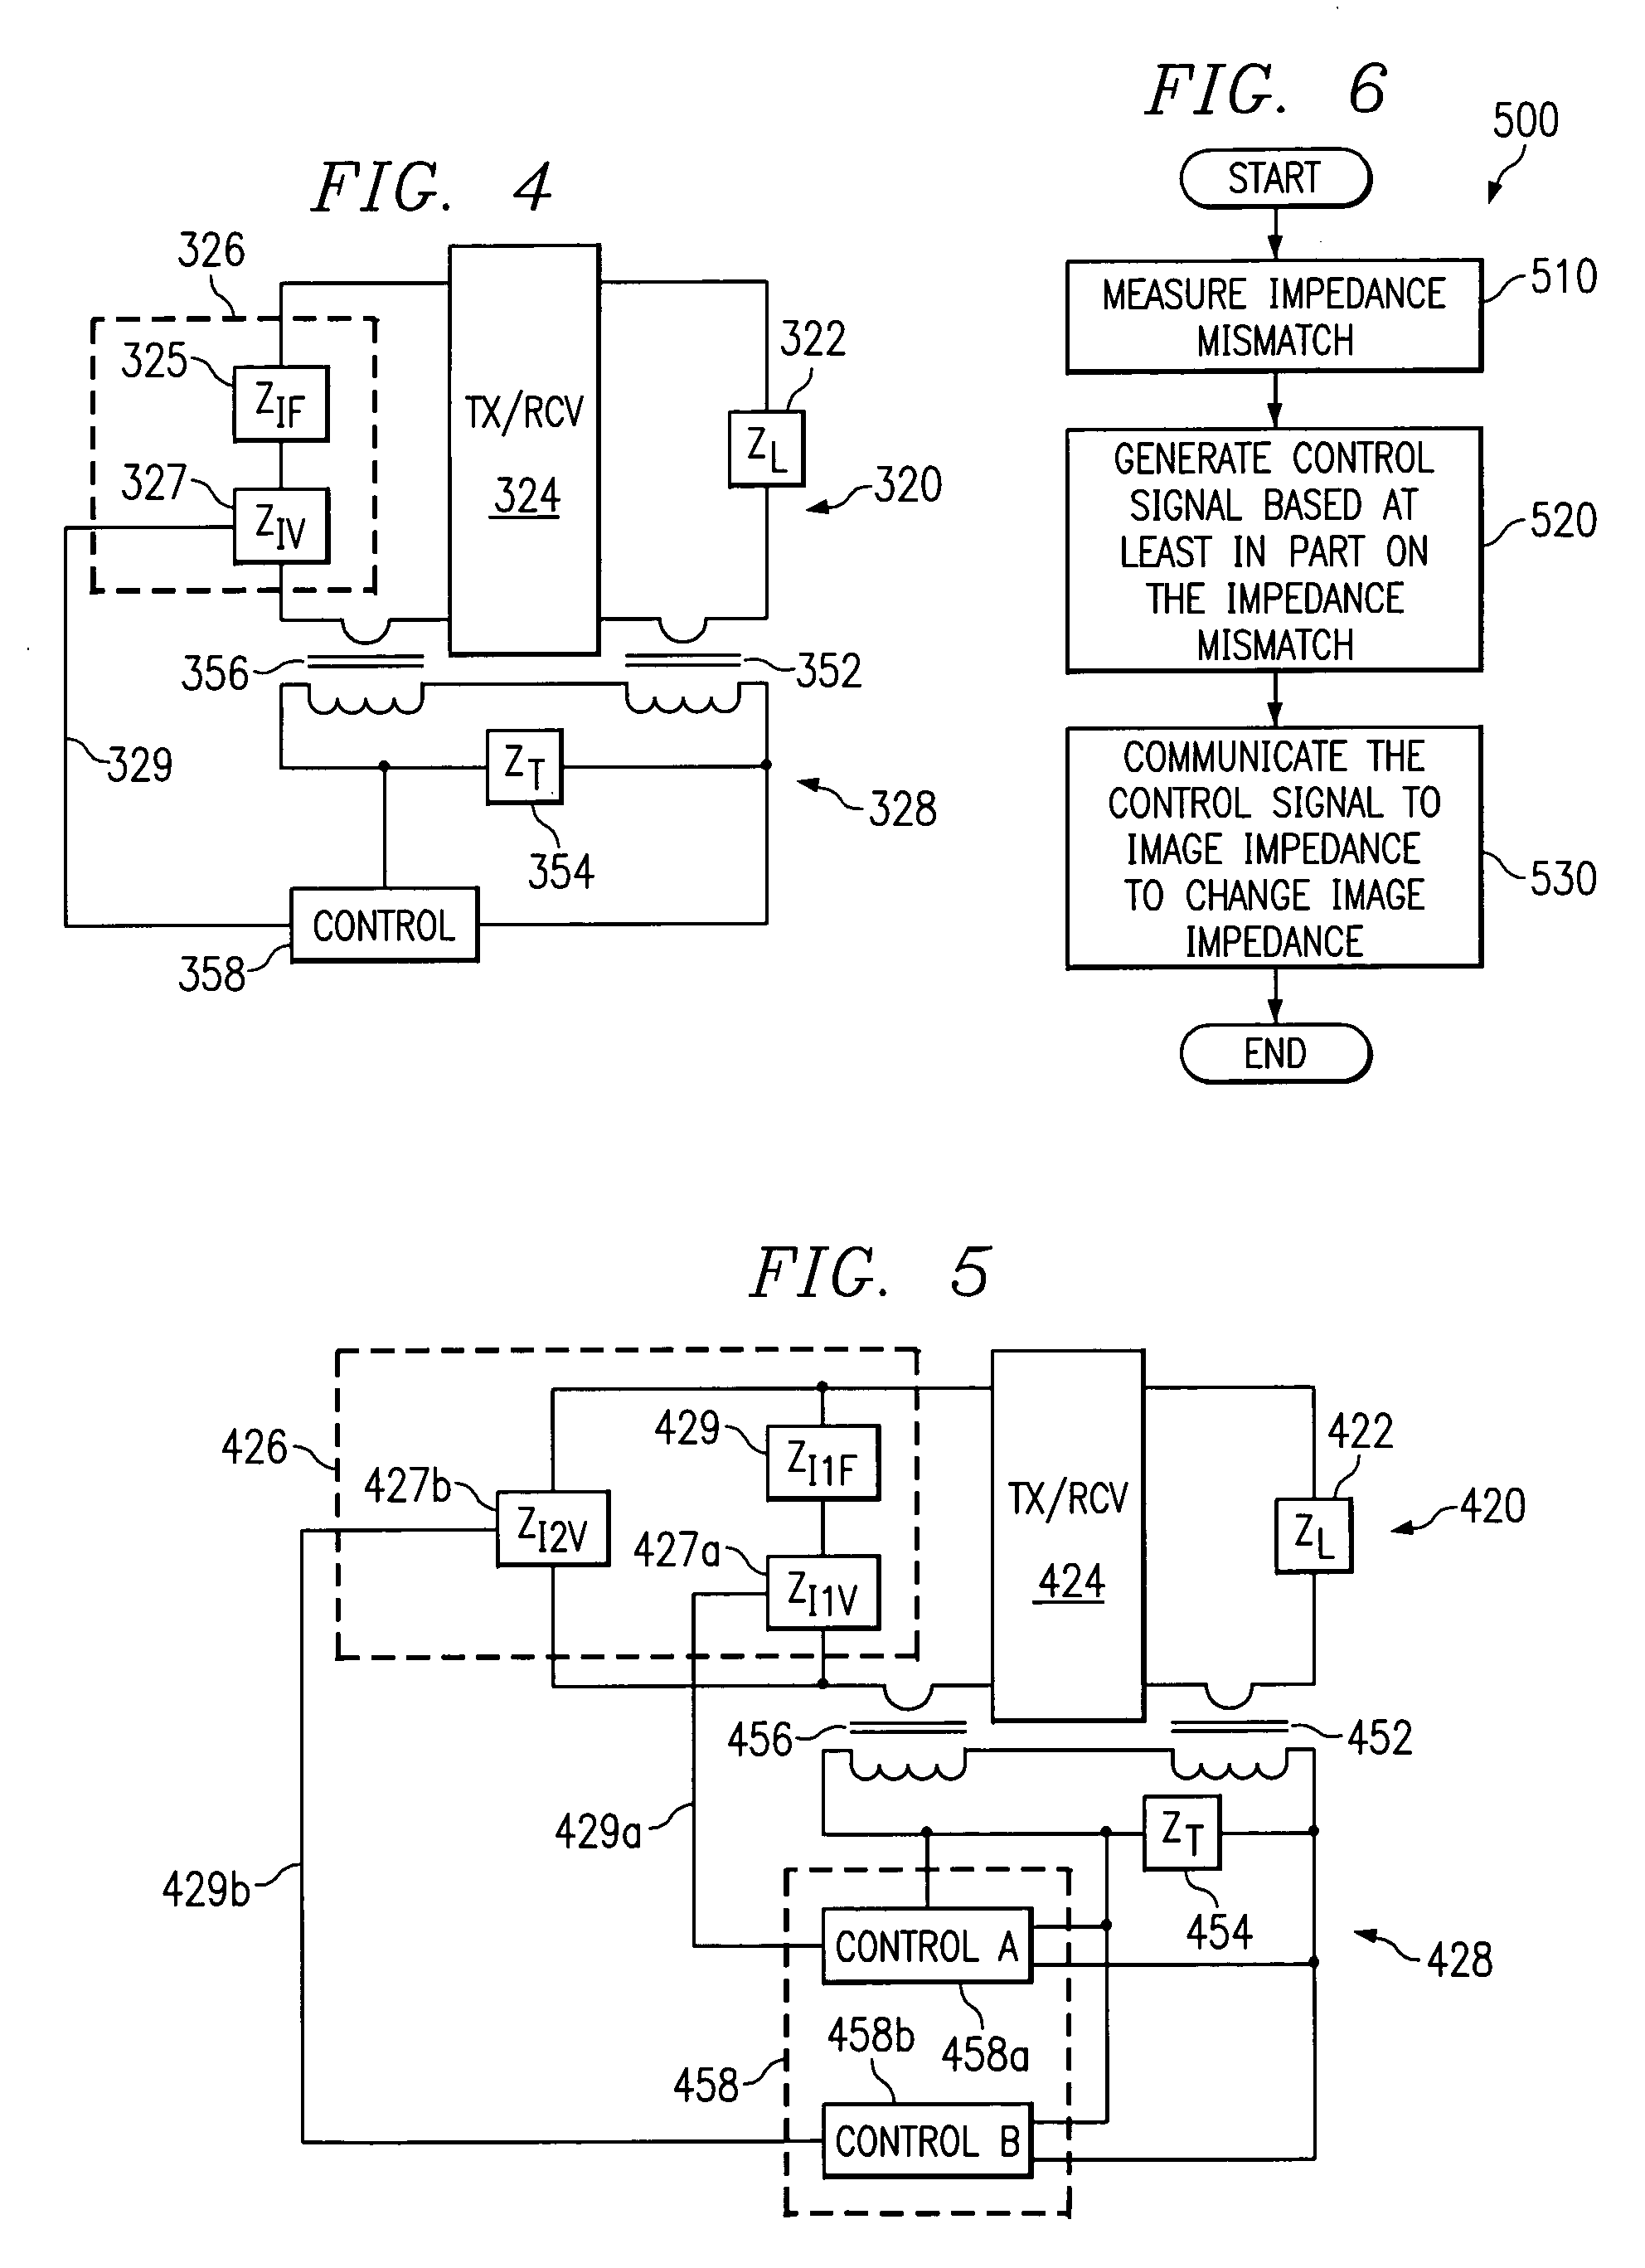 Method and apparatus for dynamically matching impedance